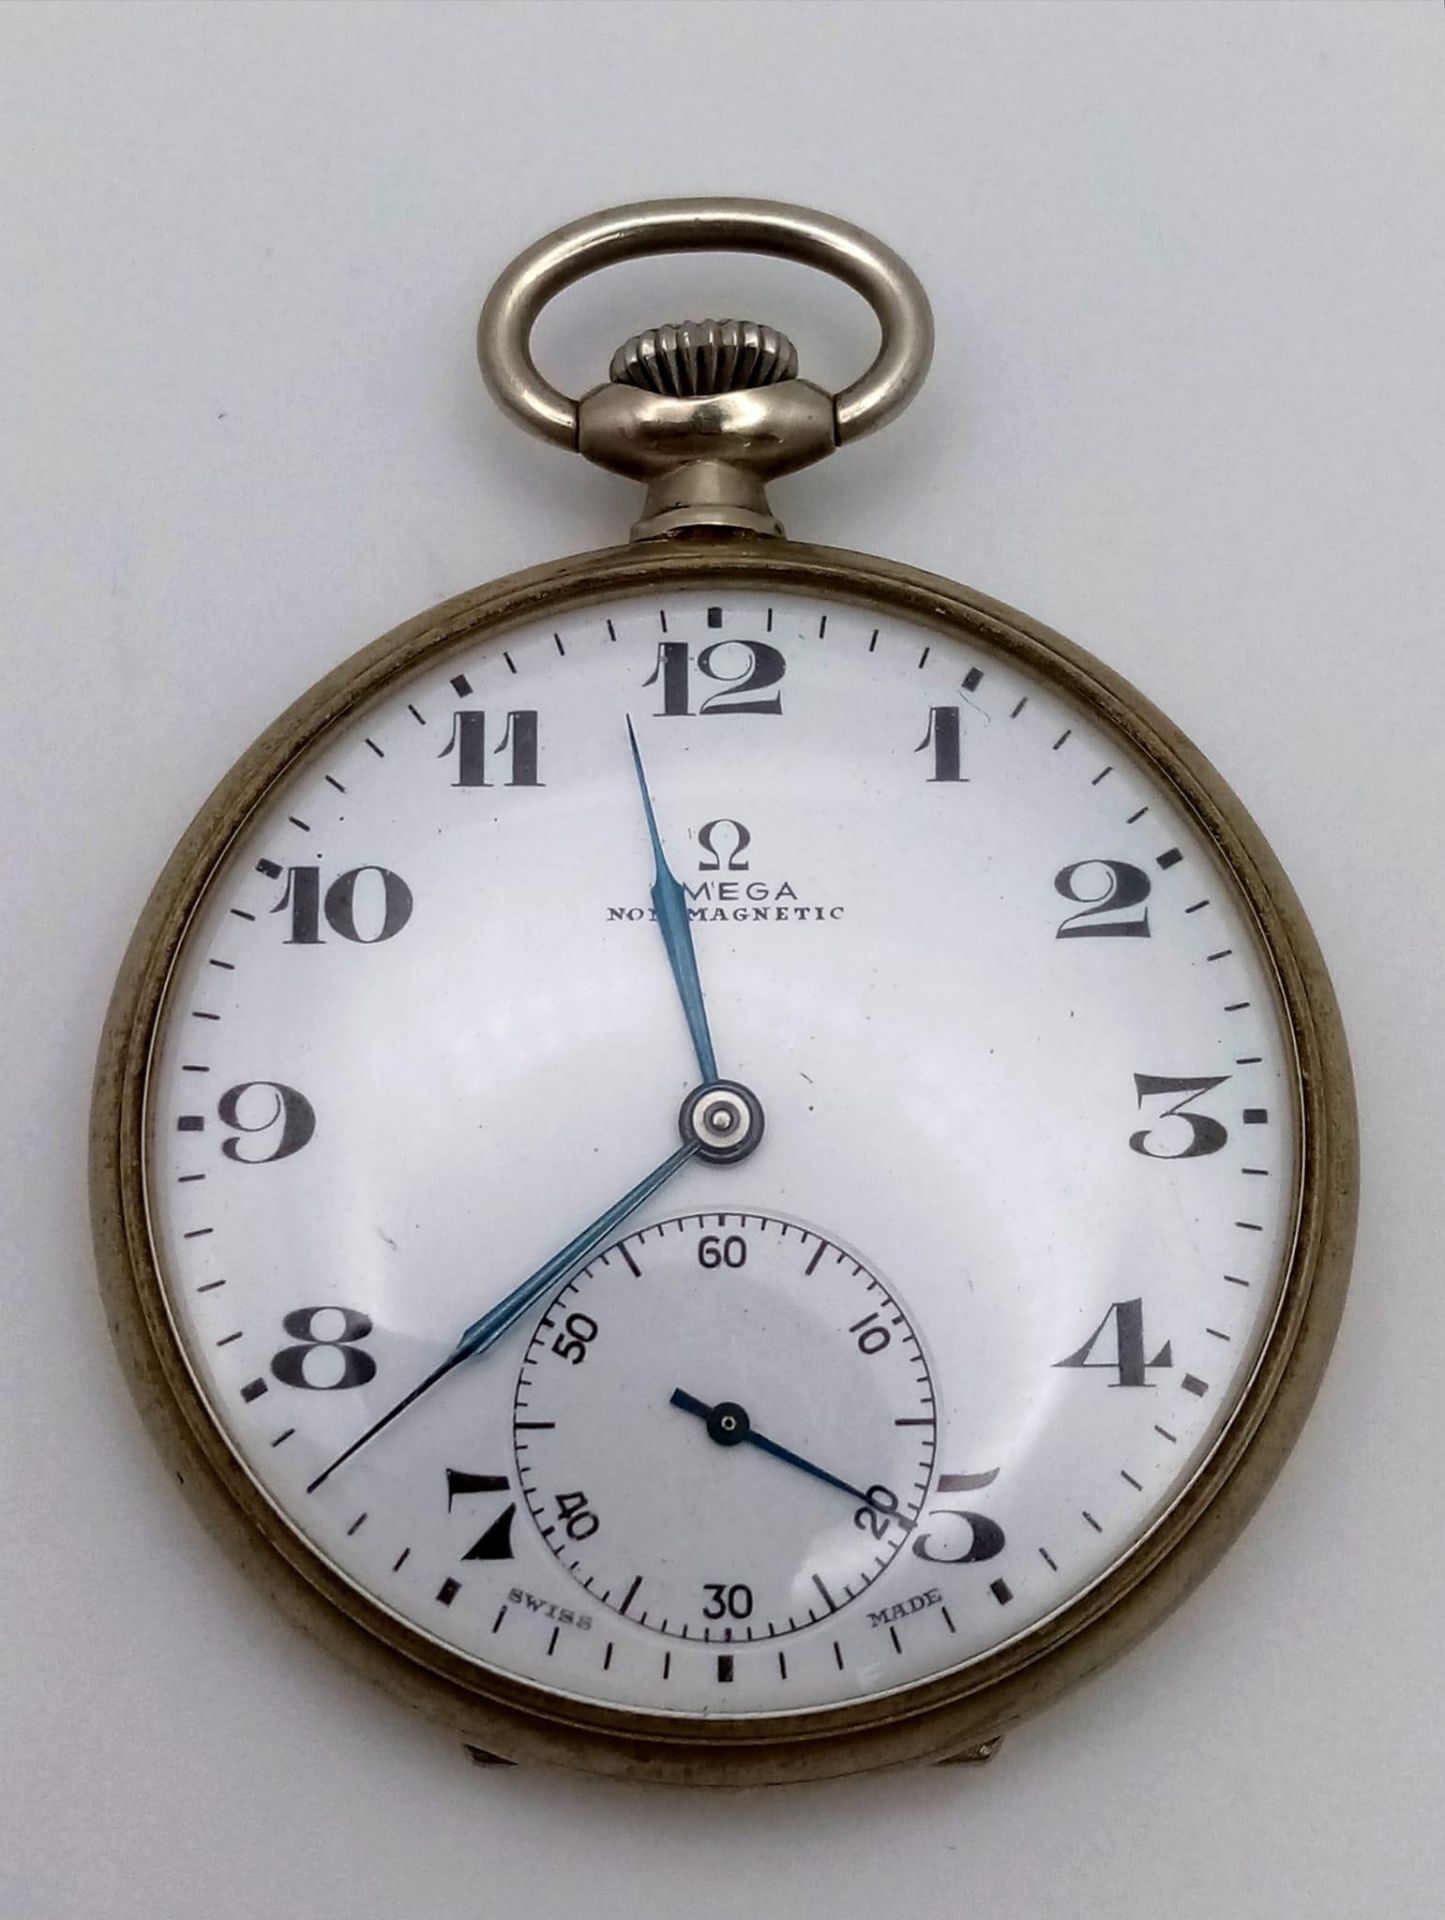 A Vintage Omega Pocket Watch. Stainless steel case with top winder. White dial with second sub dial. - Image 2 of 5